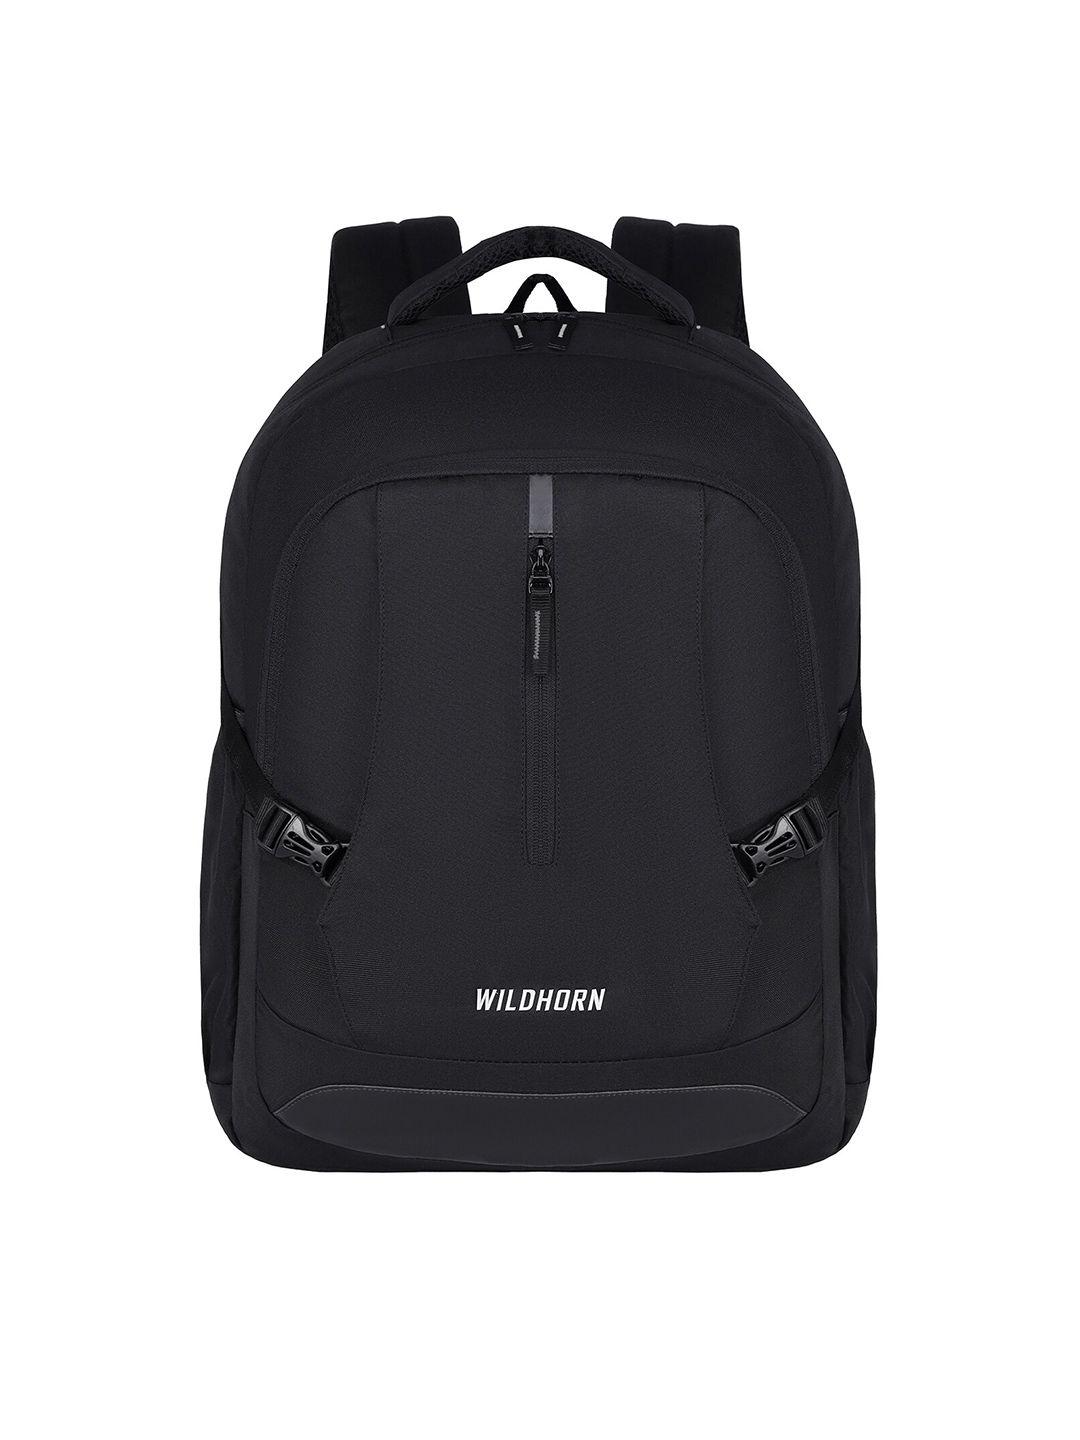 wildhorn backpack with compression straps